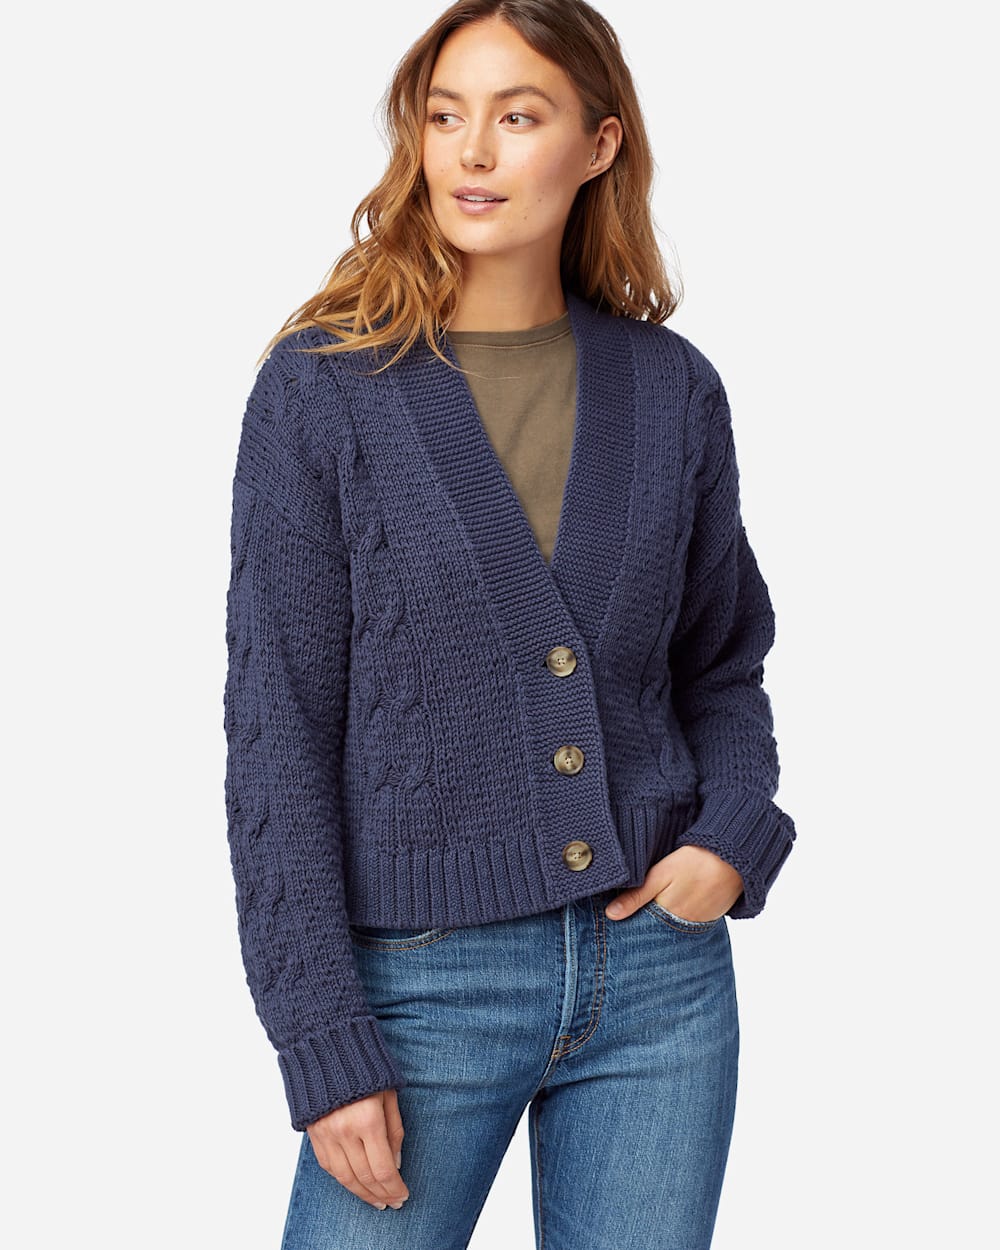 WOMEN'S CROPPED CABLE CARDIGAN